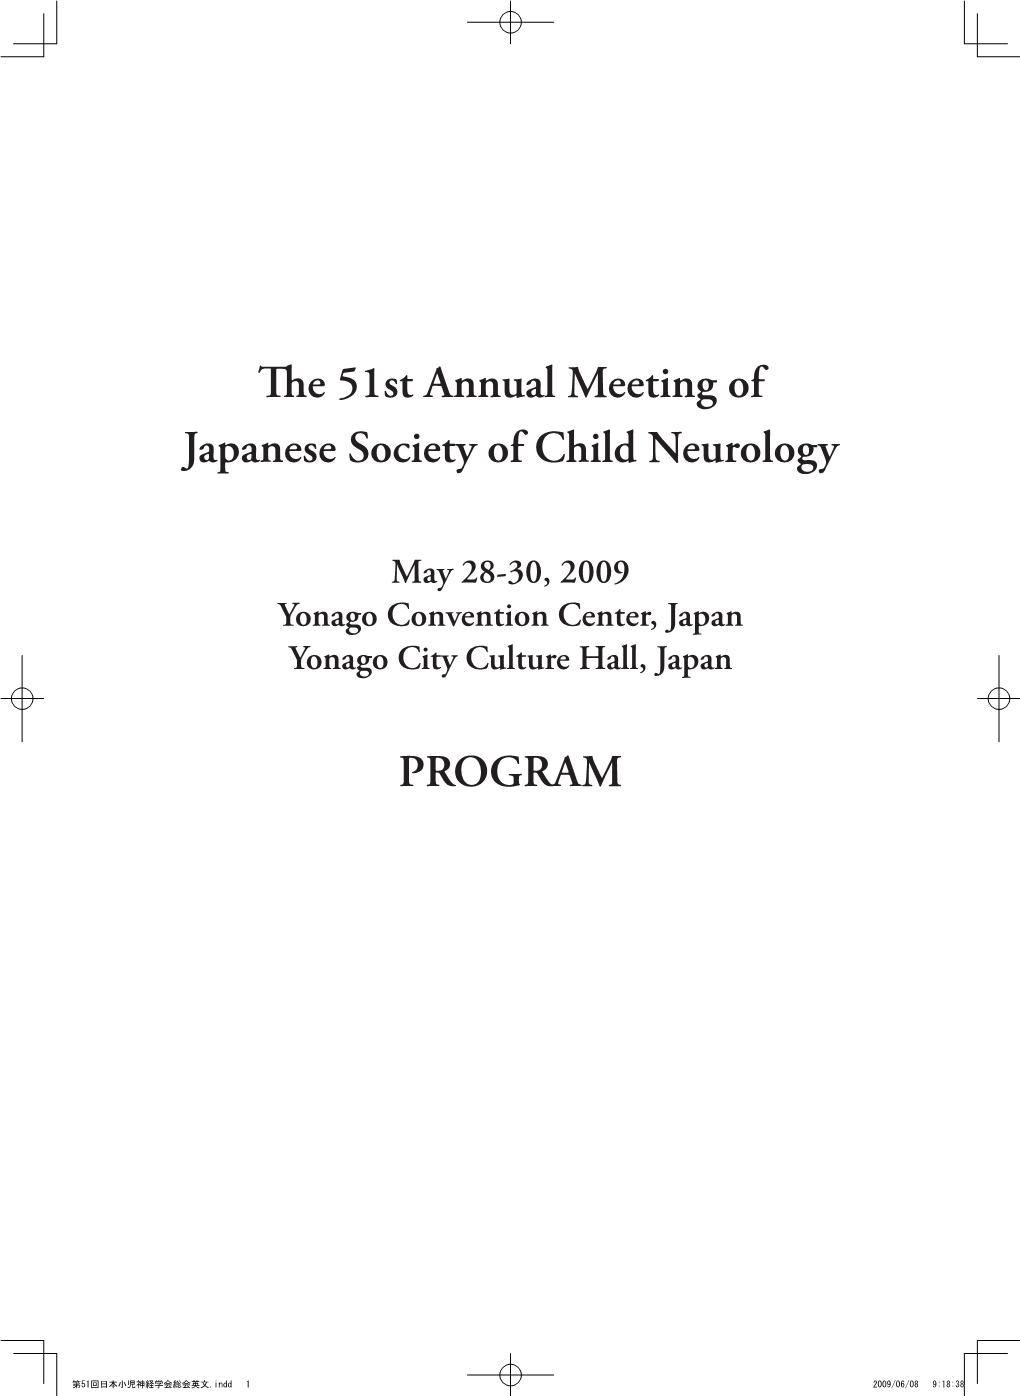 The 51St Annual Meeting of Japanese Society of Child Neurology